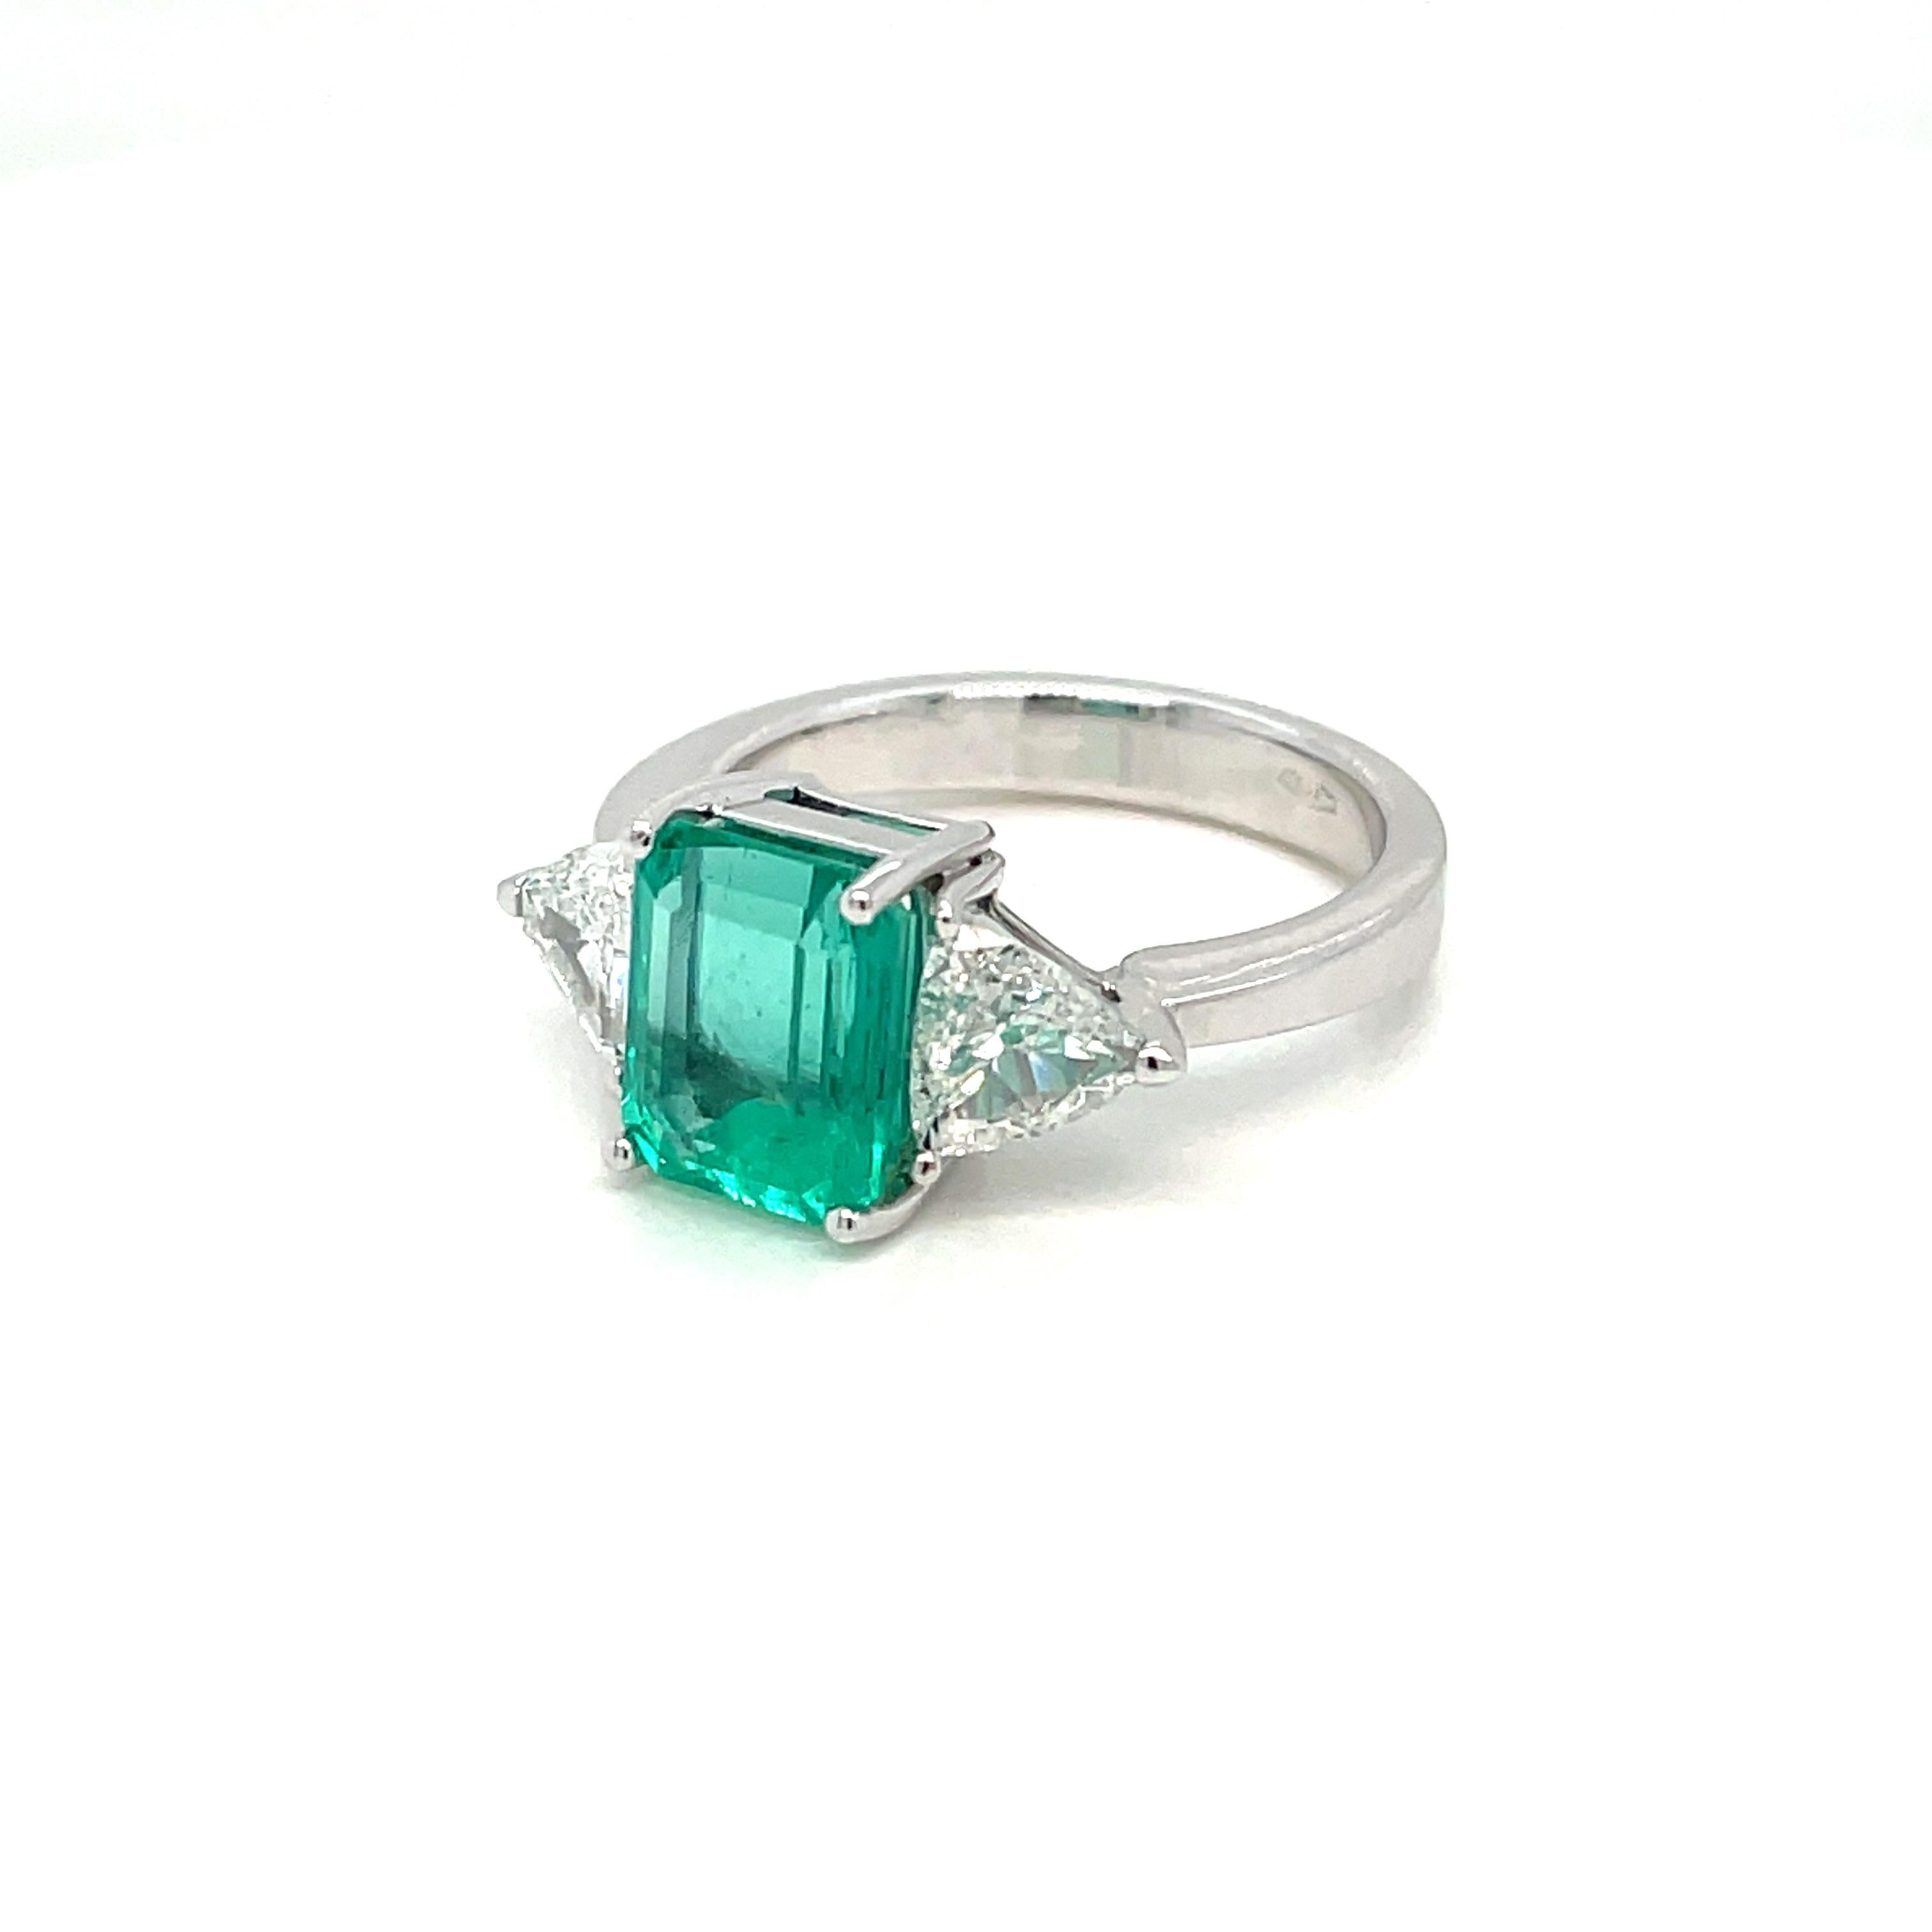 Certified 2.93 Carat Colombian Natural Emerald Diamond Ring 3